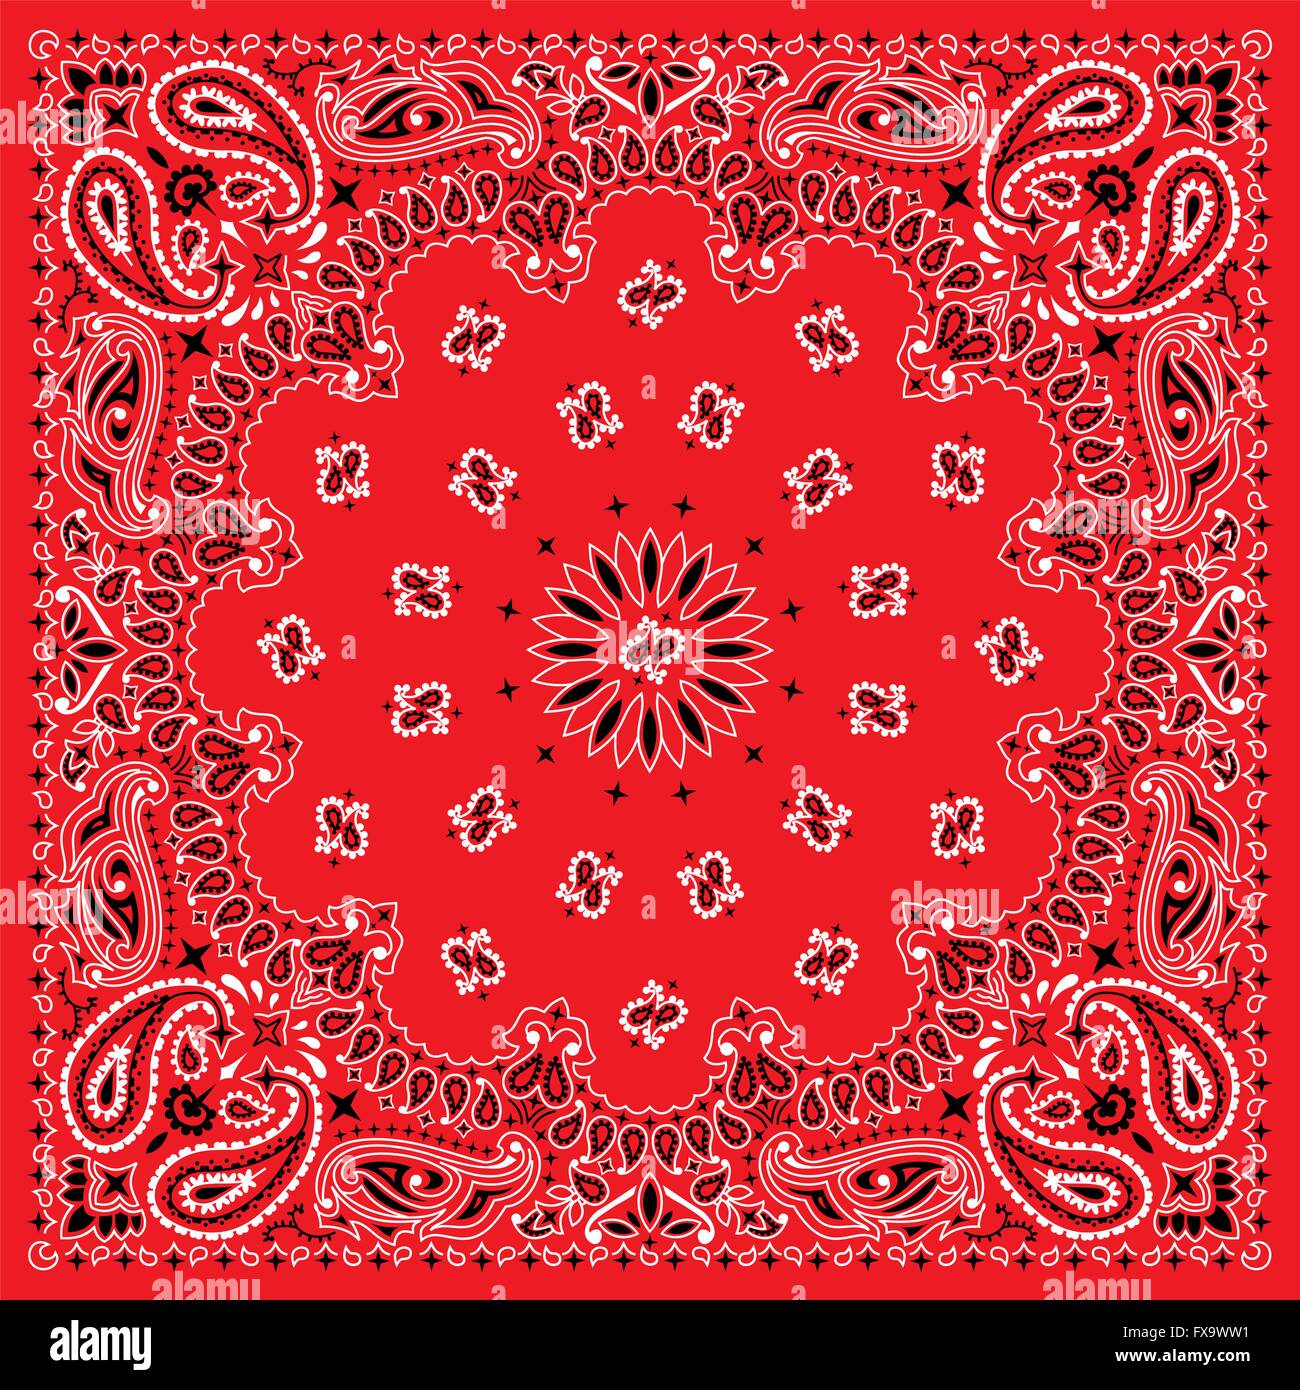 3 colors bandana. You can easily change the background color in the vector file. Stock Vector